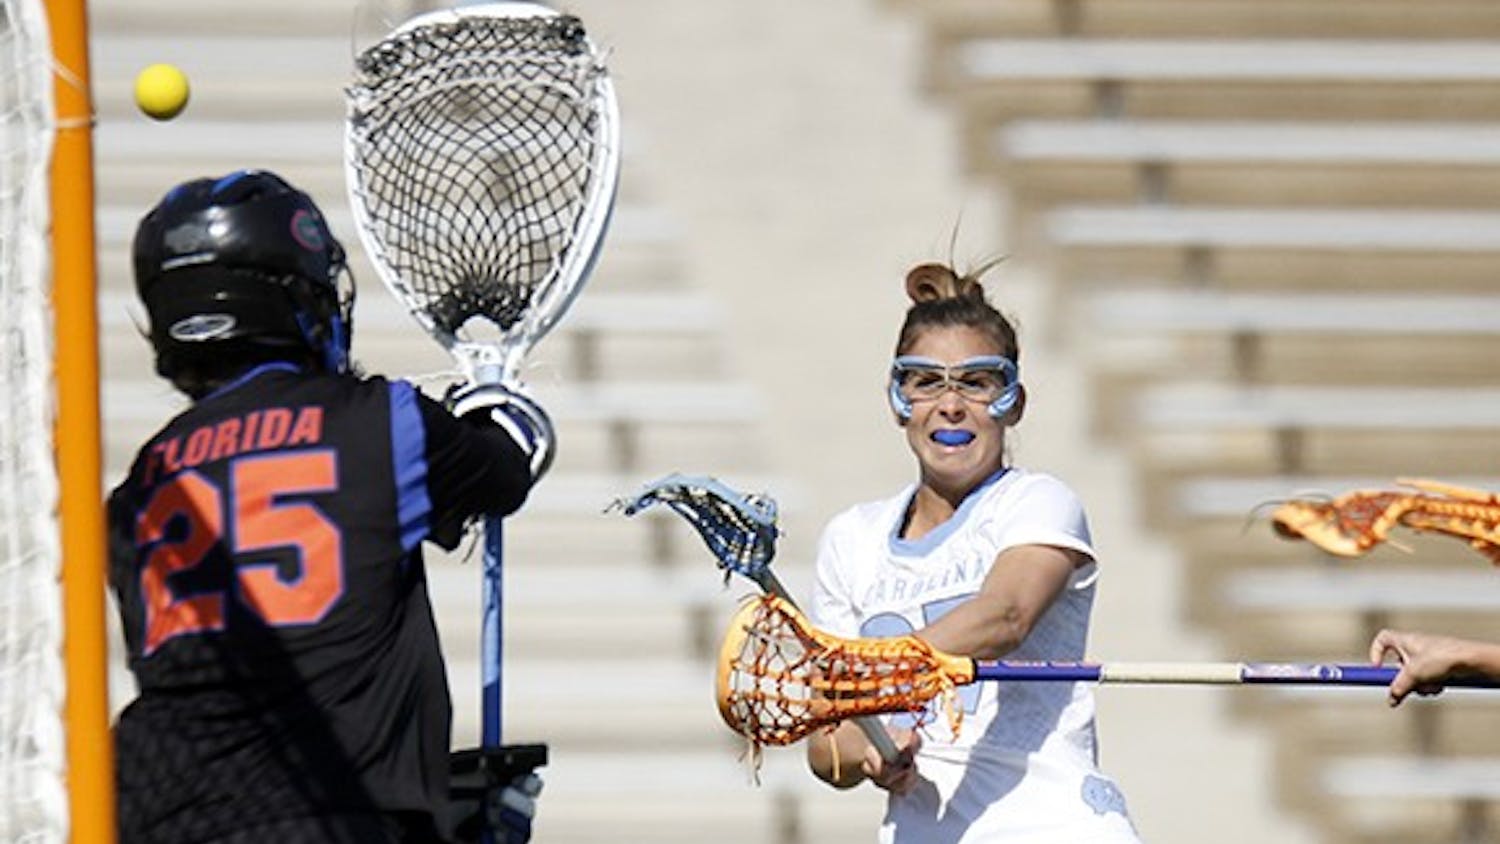 Aly Messinger (27) scores against Florida on Saturday. The Tar Heels won 20-8 at Fetzer Field. 